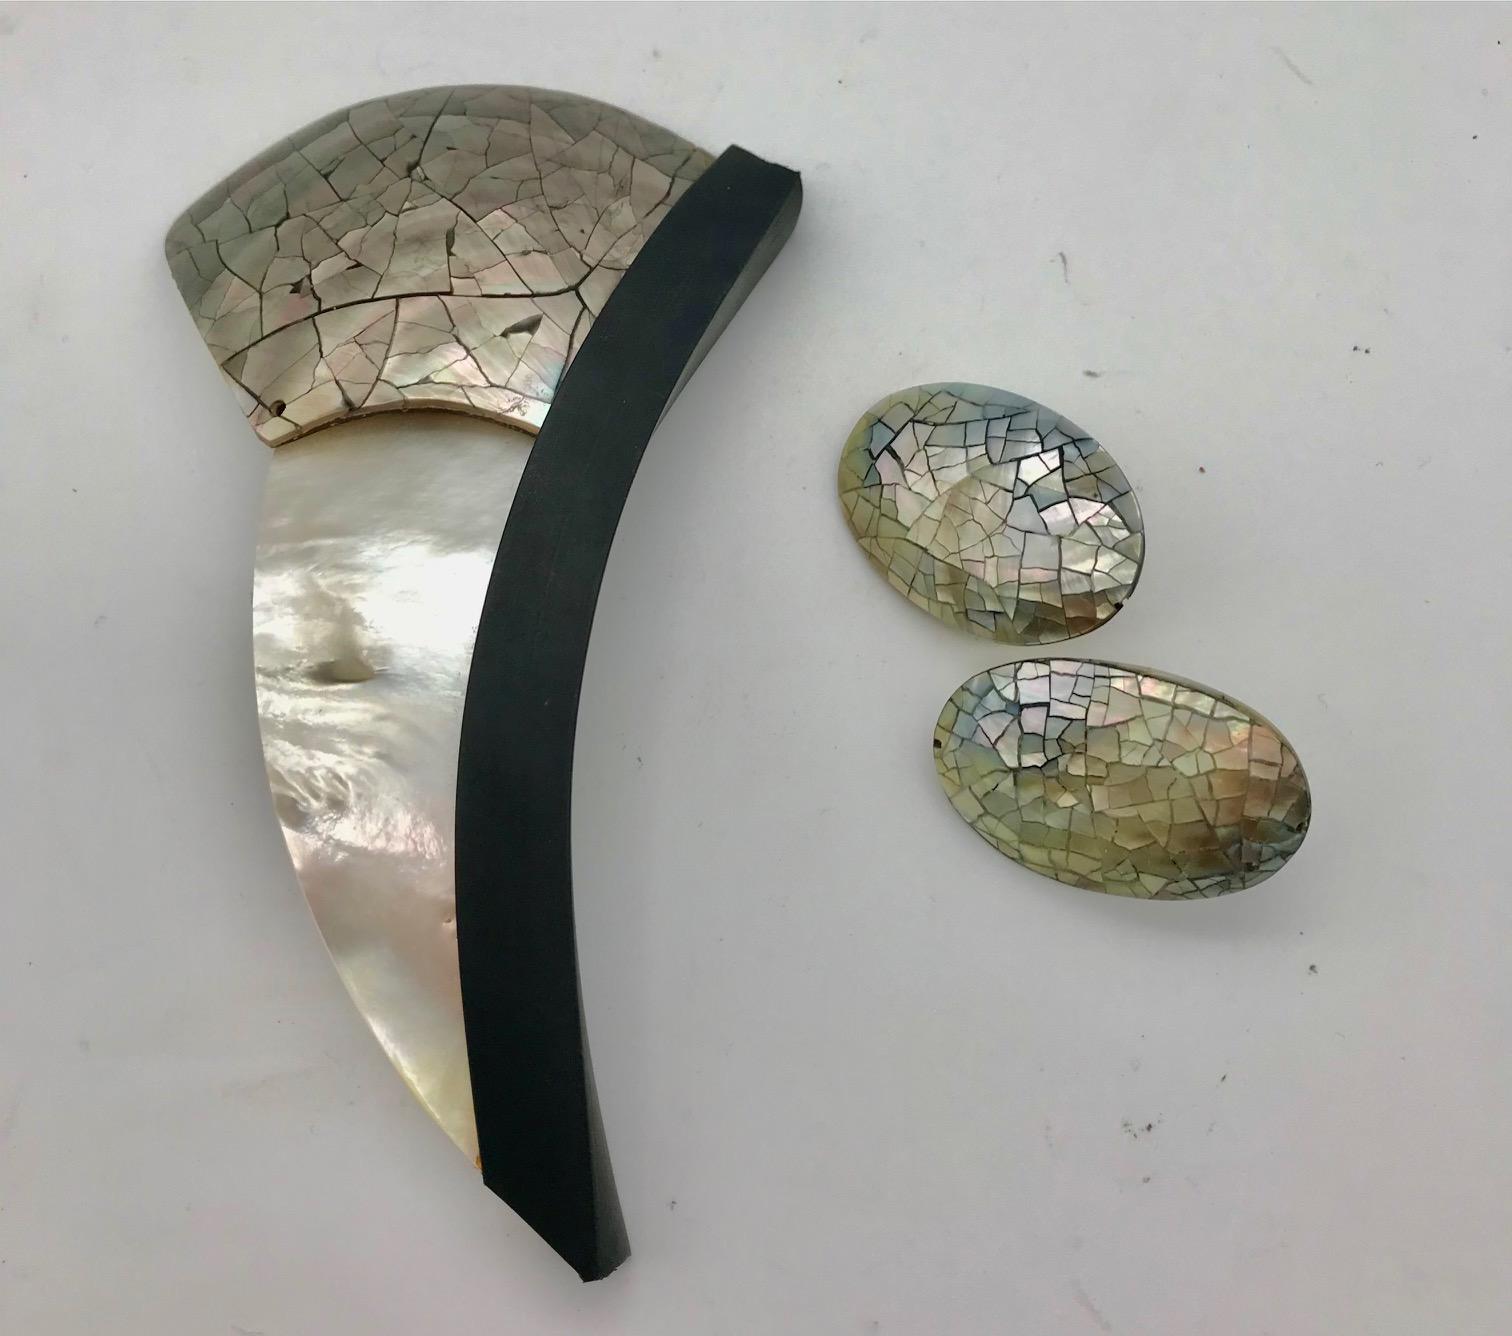  White Mother of Pearl /Abalone Brooch with matching earrings.The brooch consists of top quality white mop and beautiful Abalone fastened with black rubber channel. The clasp is magnetic.The earrings are matching Abalone in oval shape with with clip